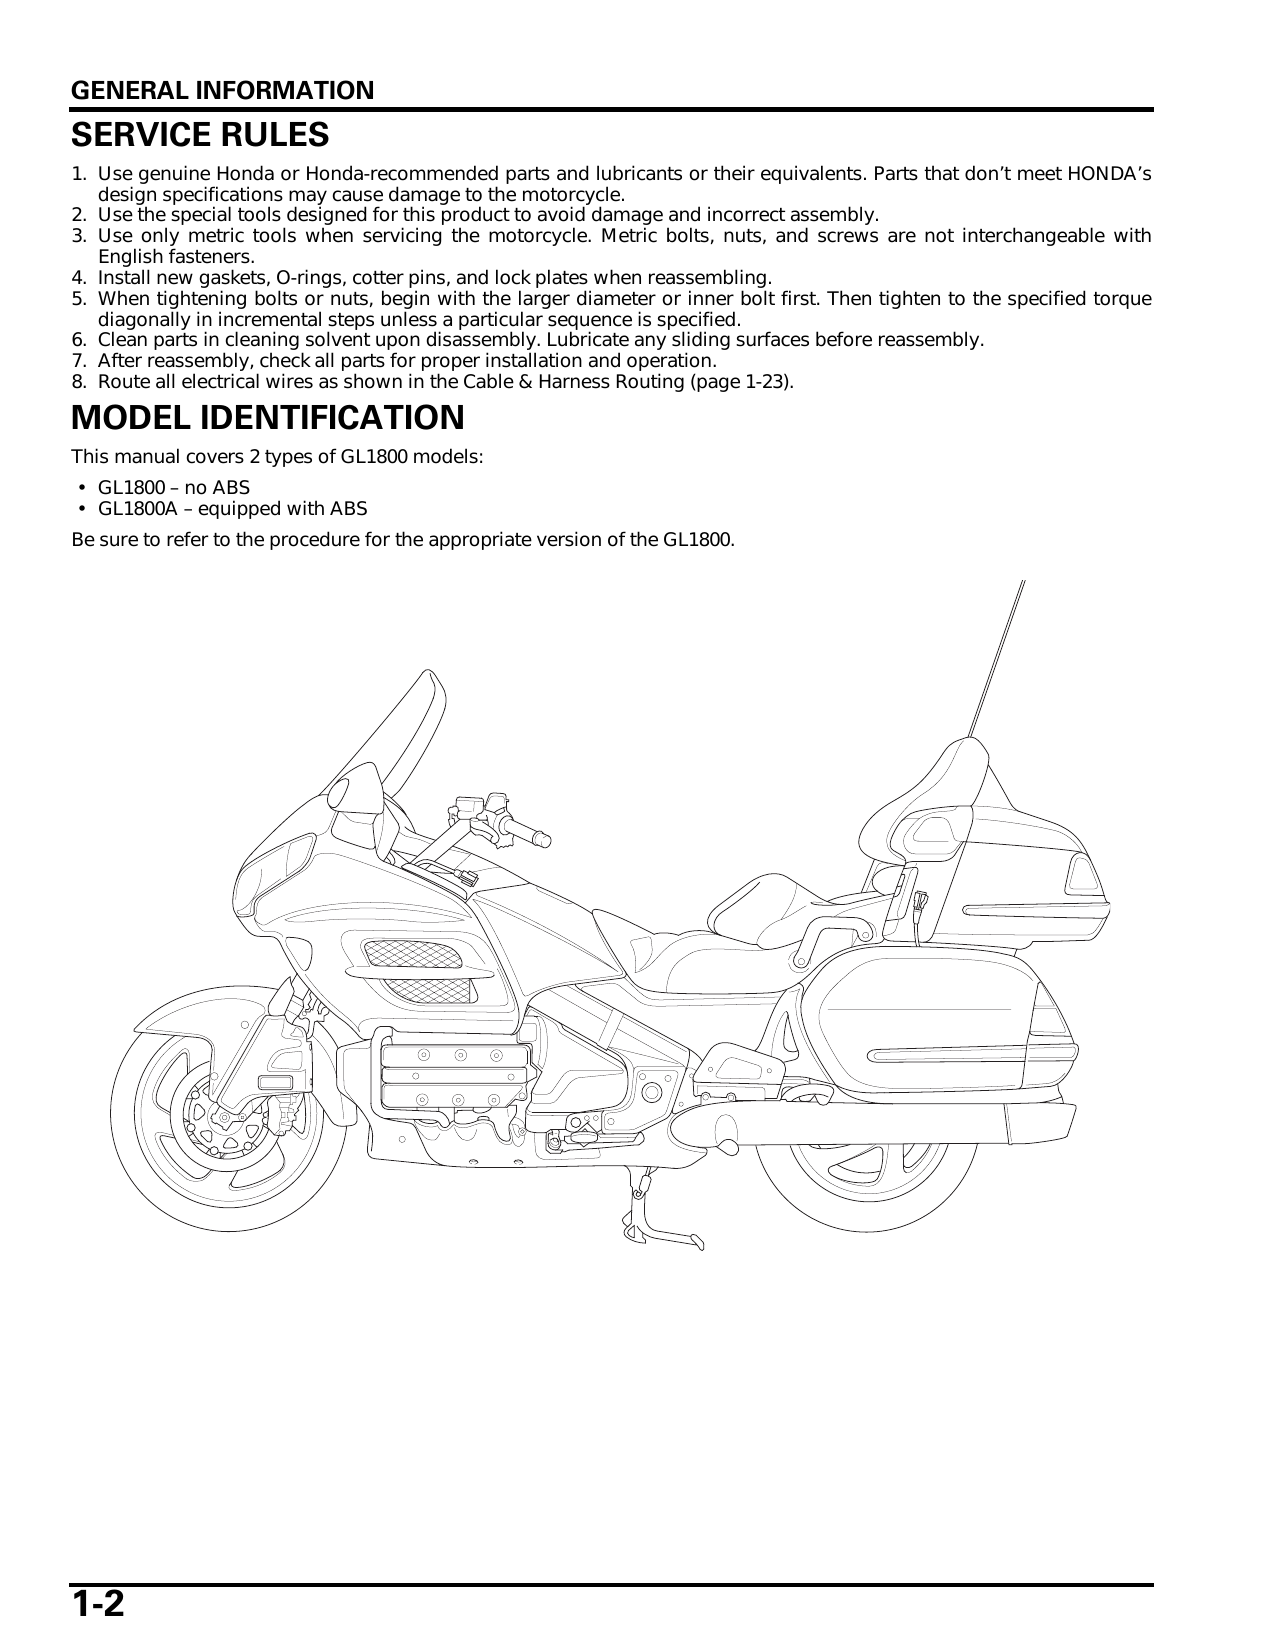 2001-2010 Honda GL1800, GL1800A Gold Wing service manual Preview image 4